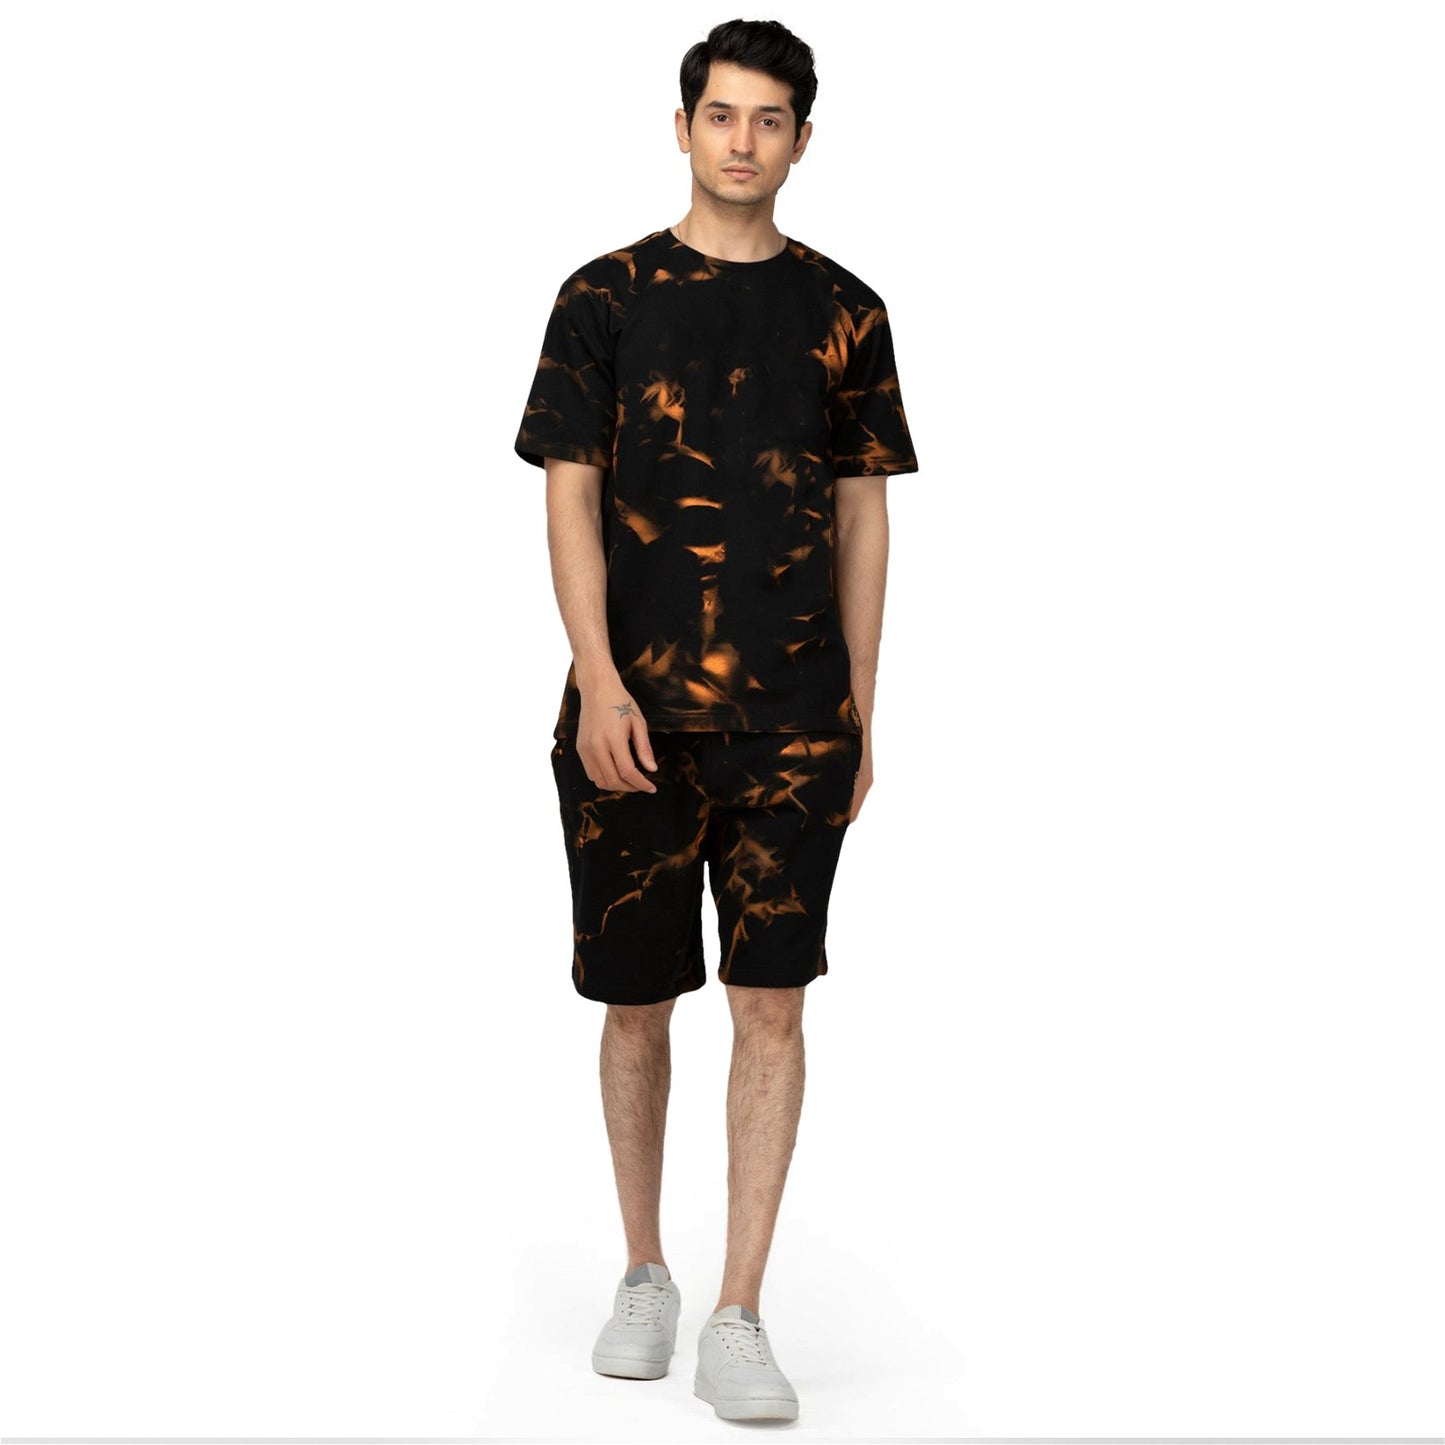 Tie Day Printed T-Shirt and Shorts For Men in Black Color